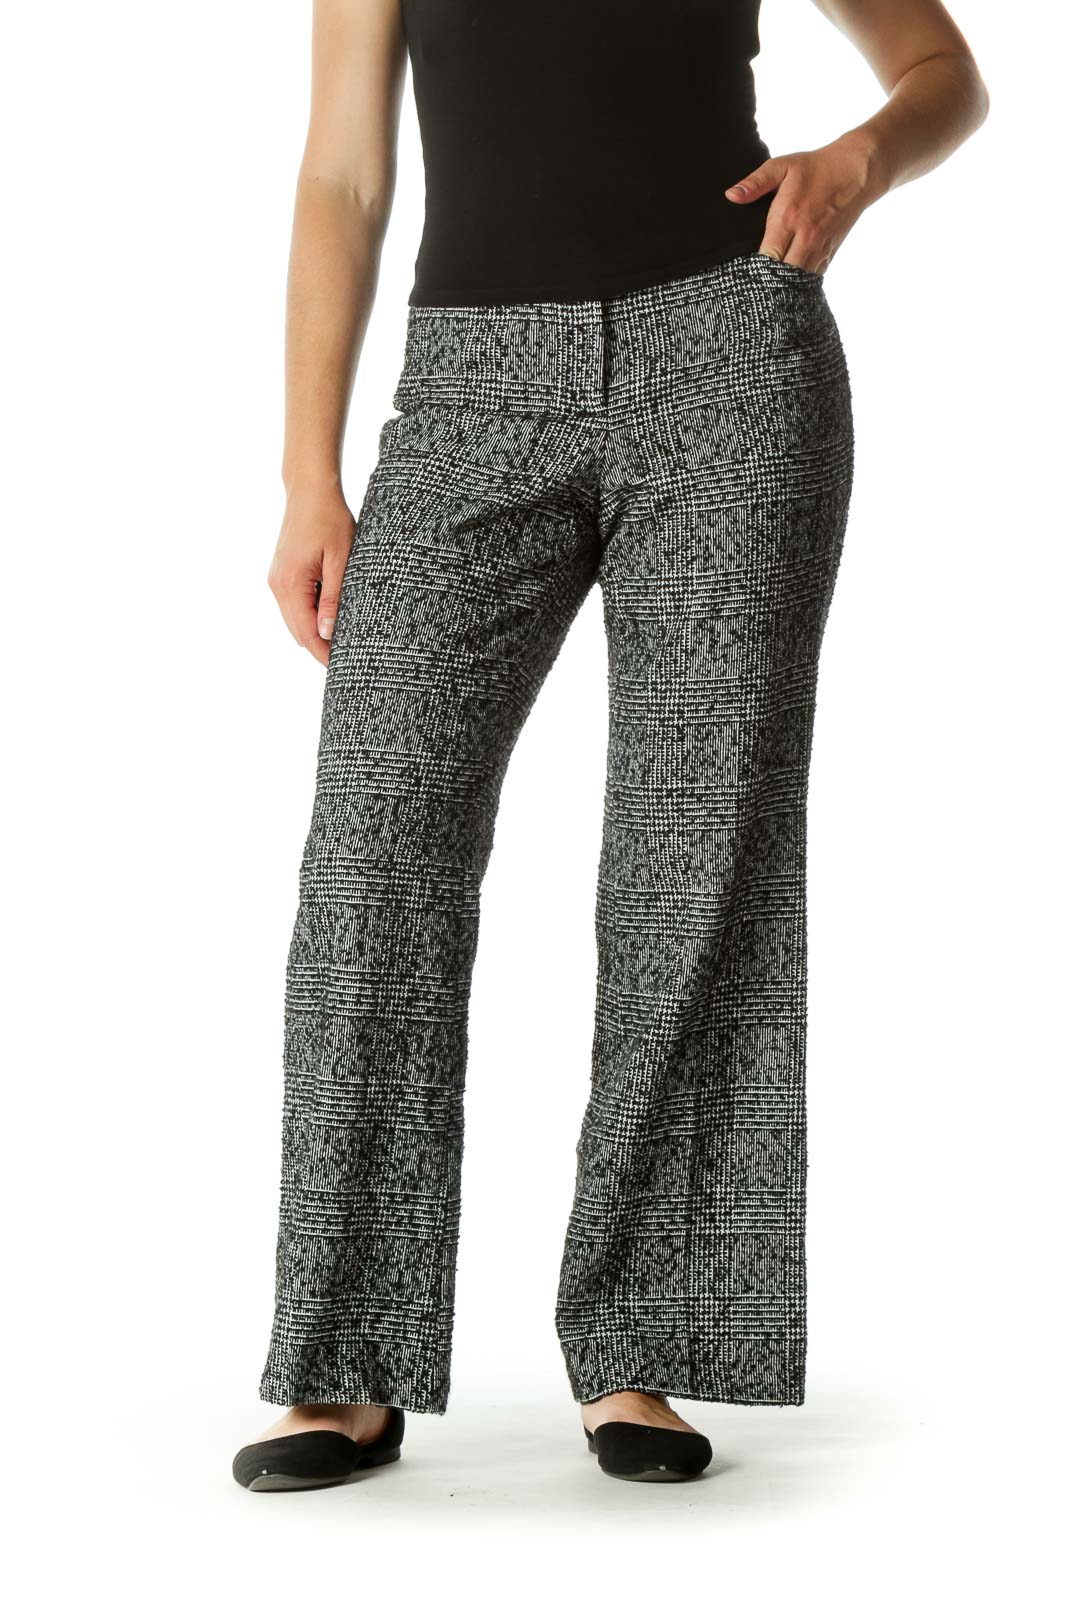 Black White Wool Blend Textured Pattern Pants Front